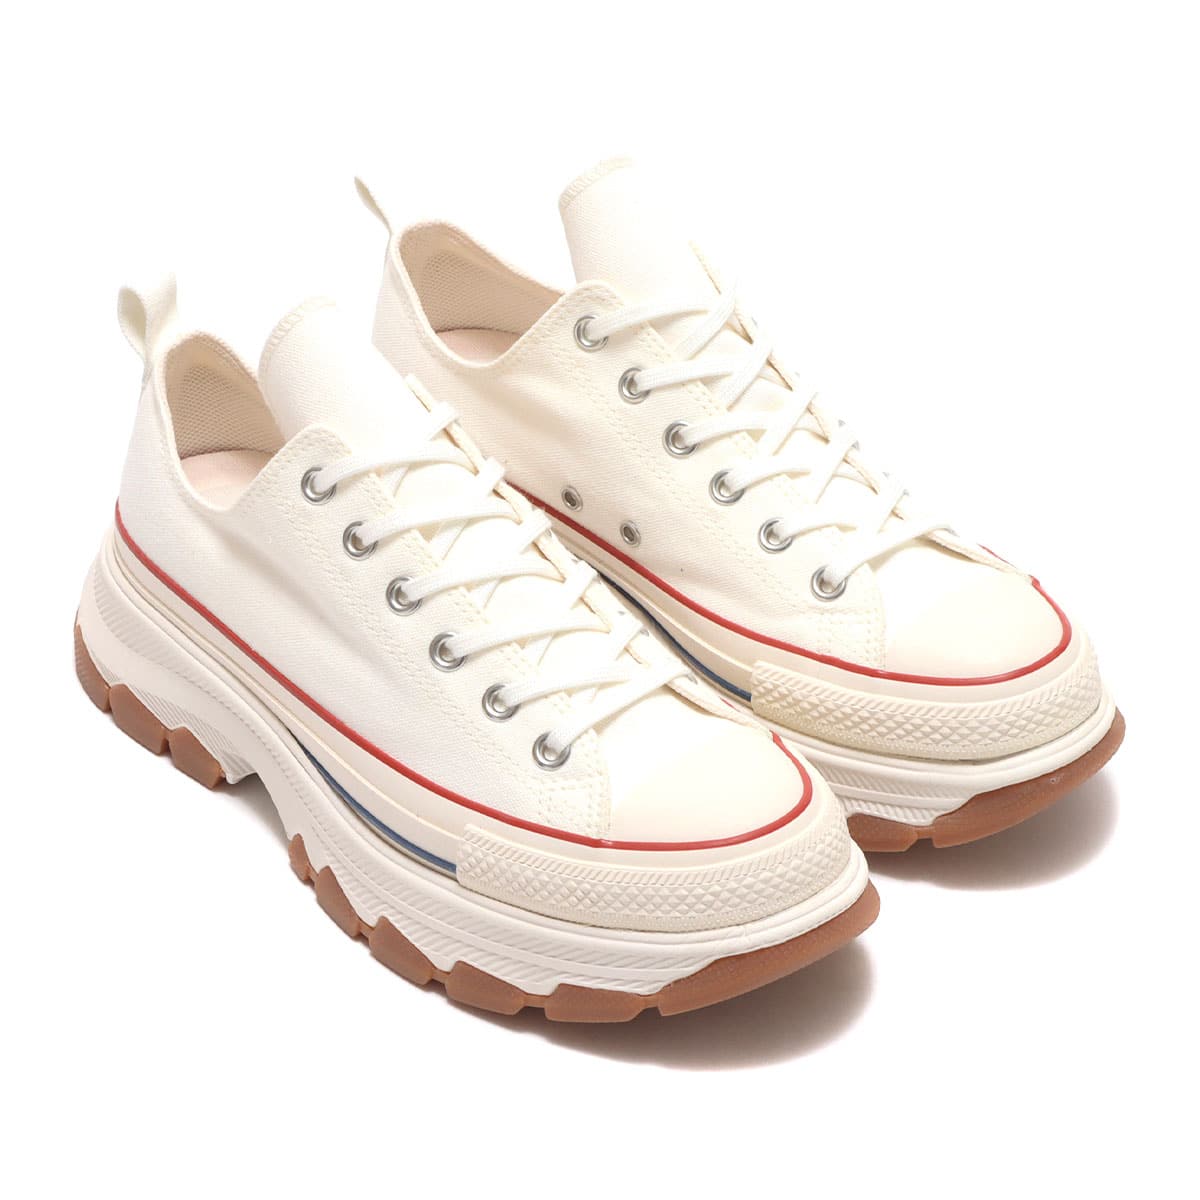 CONVERSE ALL STAR 100 TREKWAVE OX WHITE 22FW-I